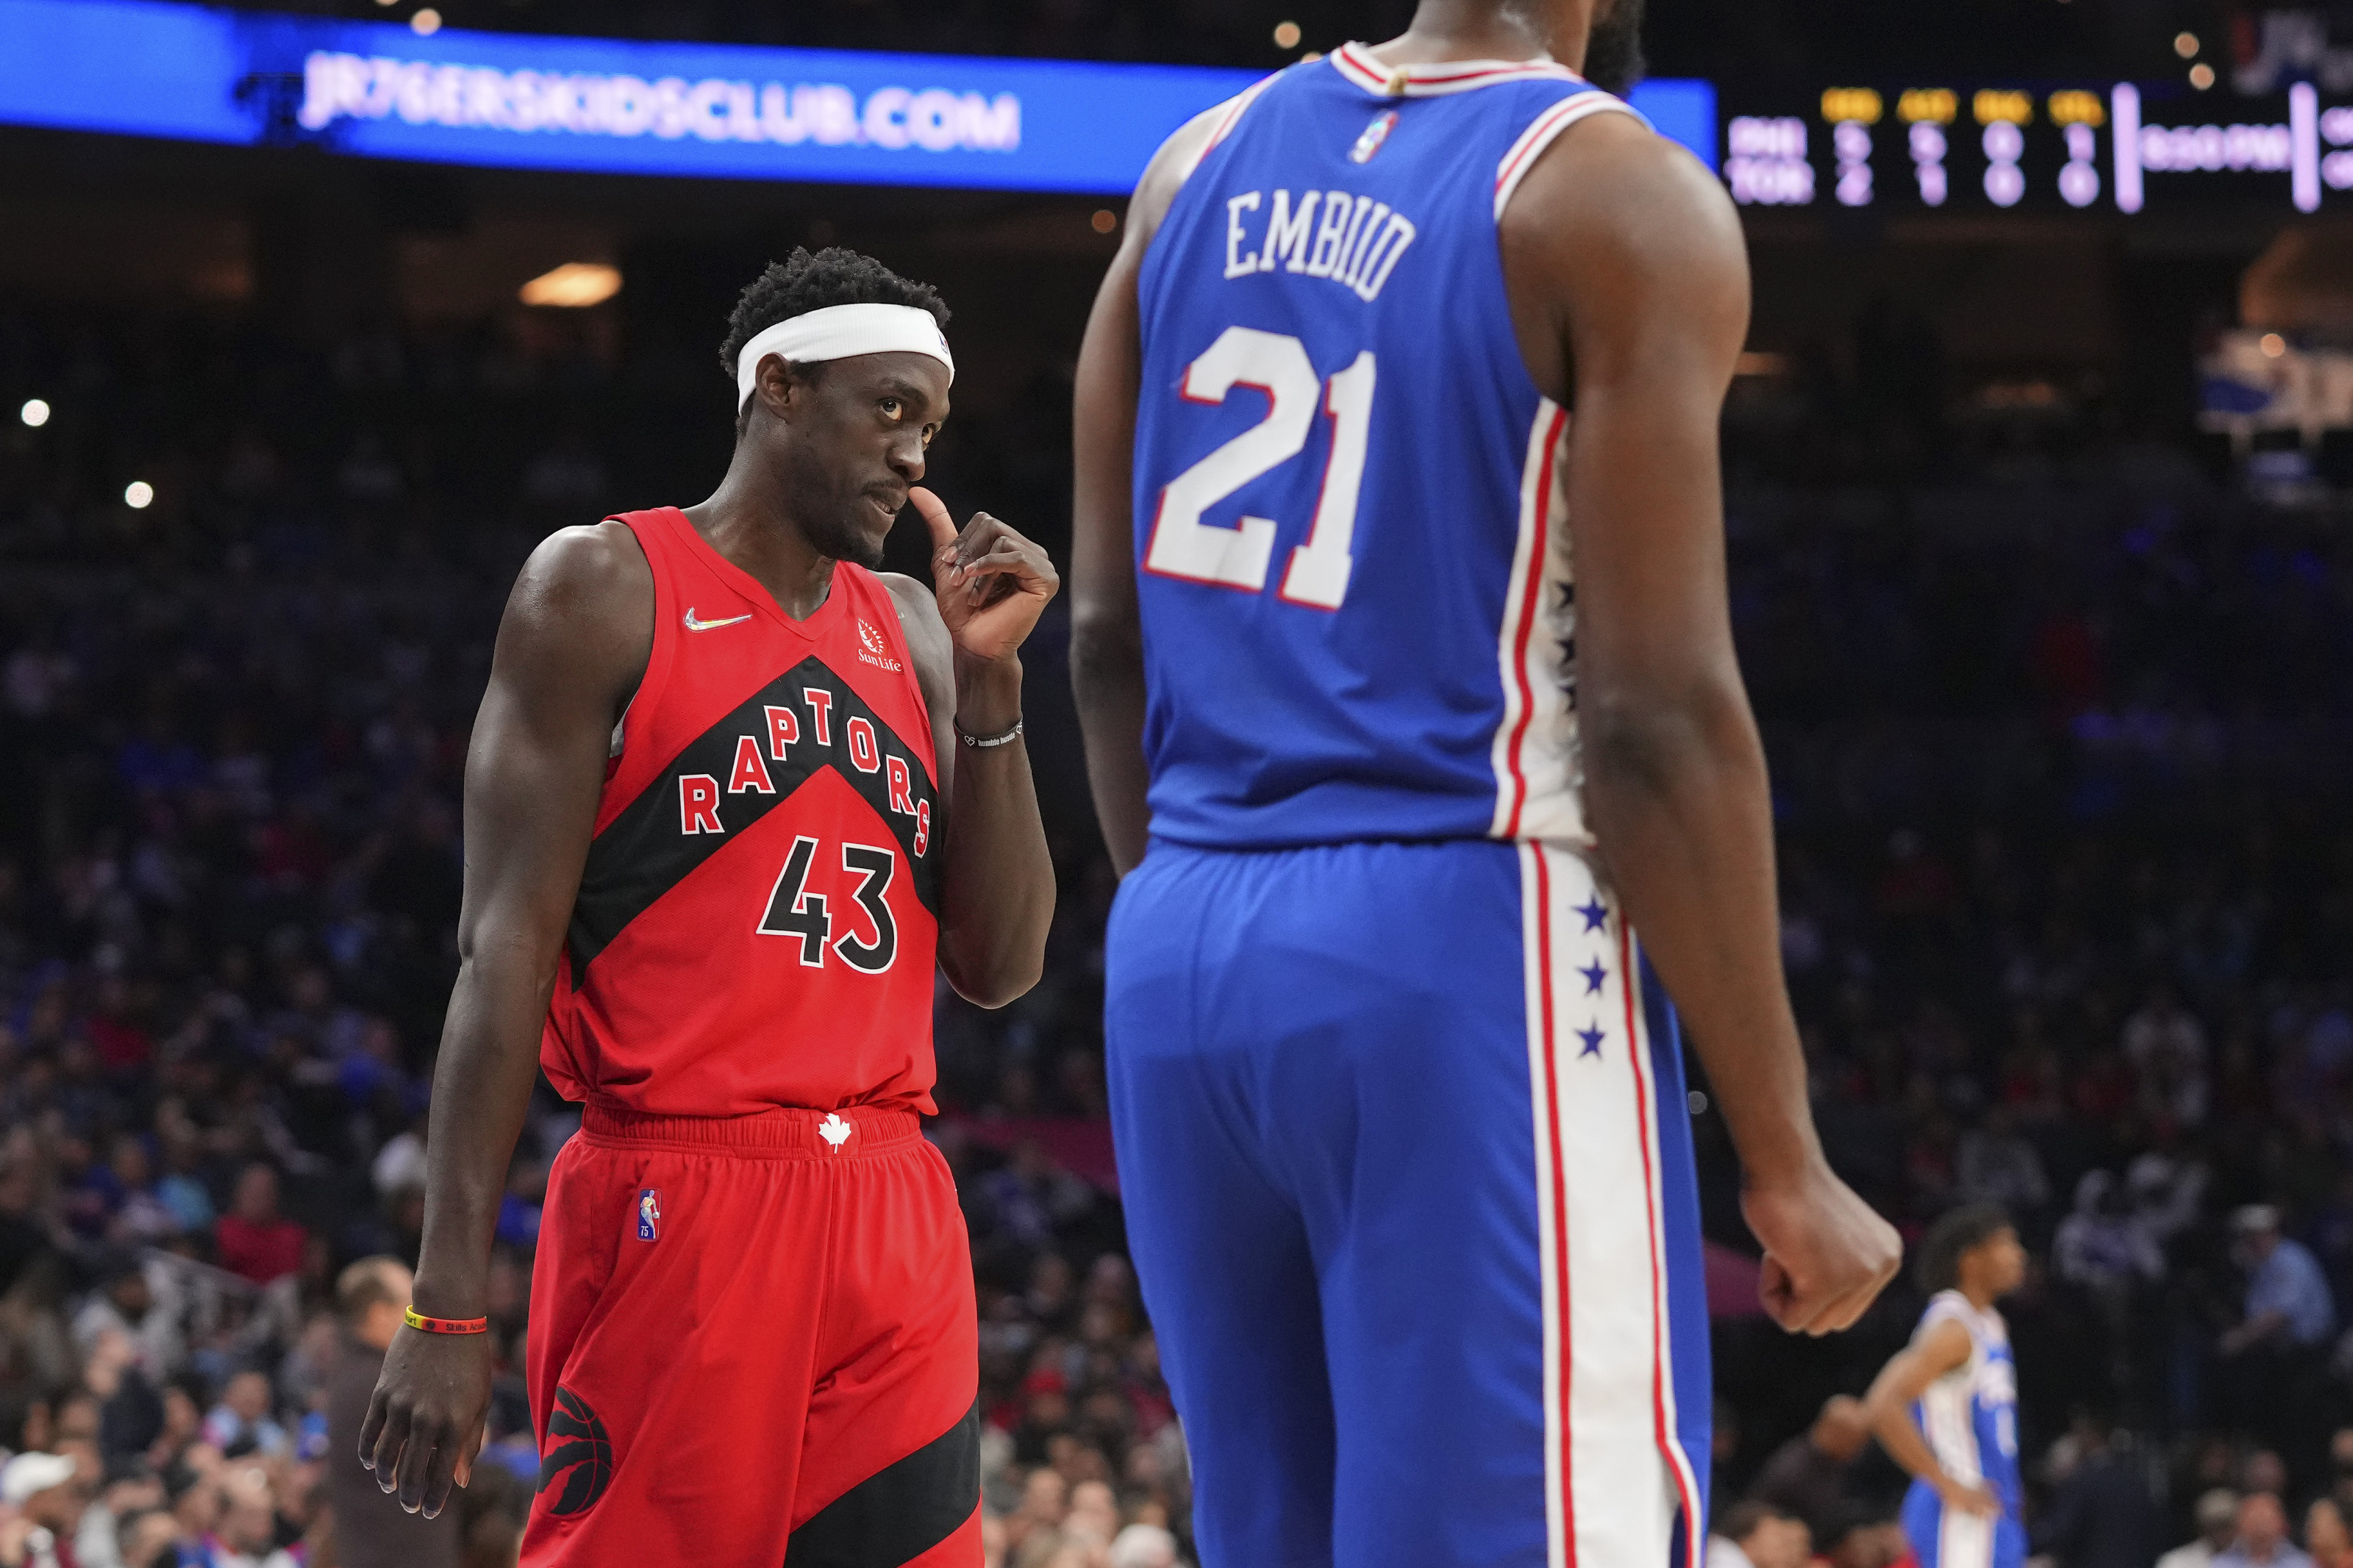 Raptors Game Tonight Raptors vs 76ers Odds, Starting Lineup, Injury Report, Predictions, TV Channel for NBA Playoffs Game 1